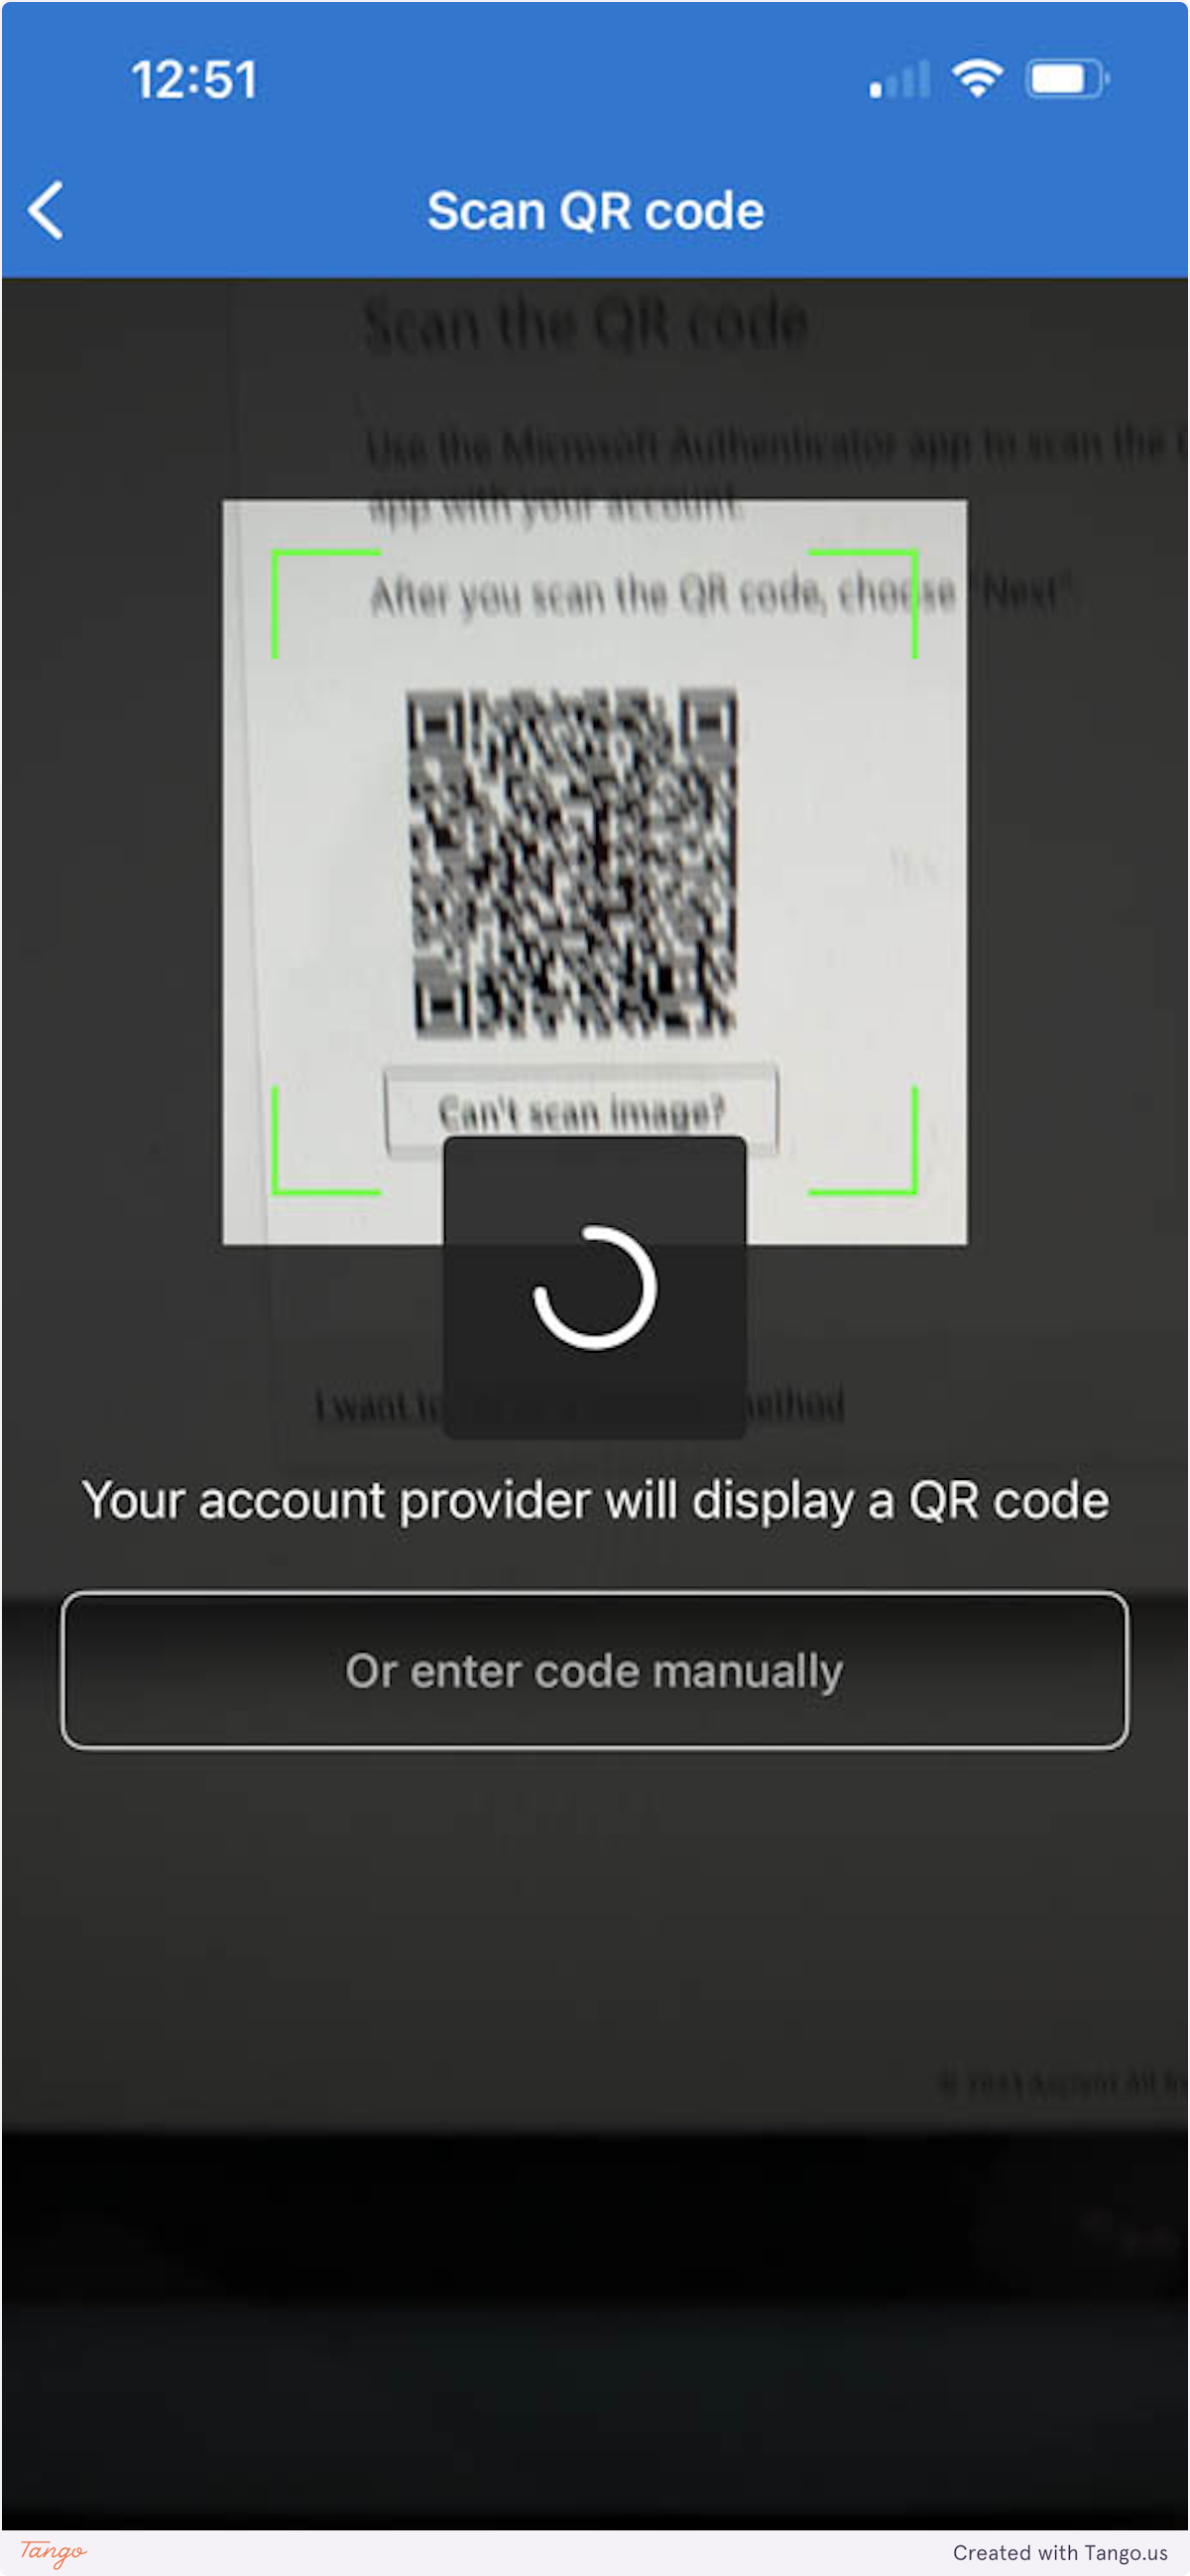 Scan the QR code on your screen